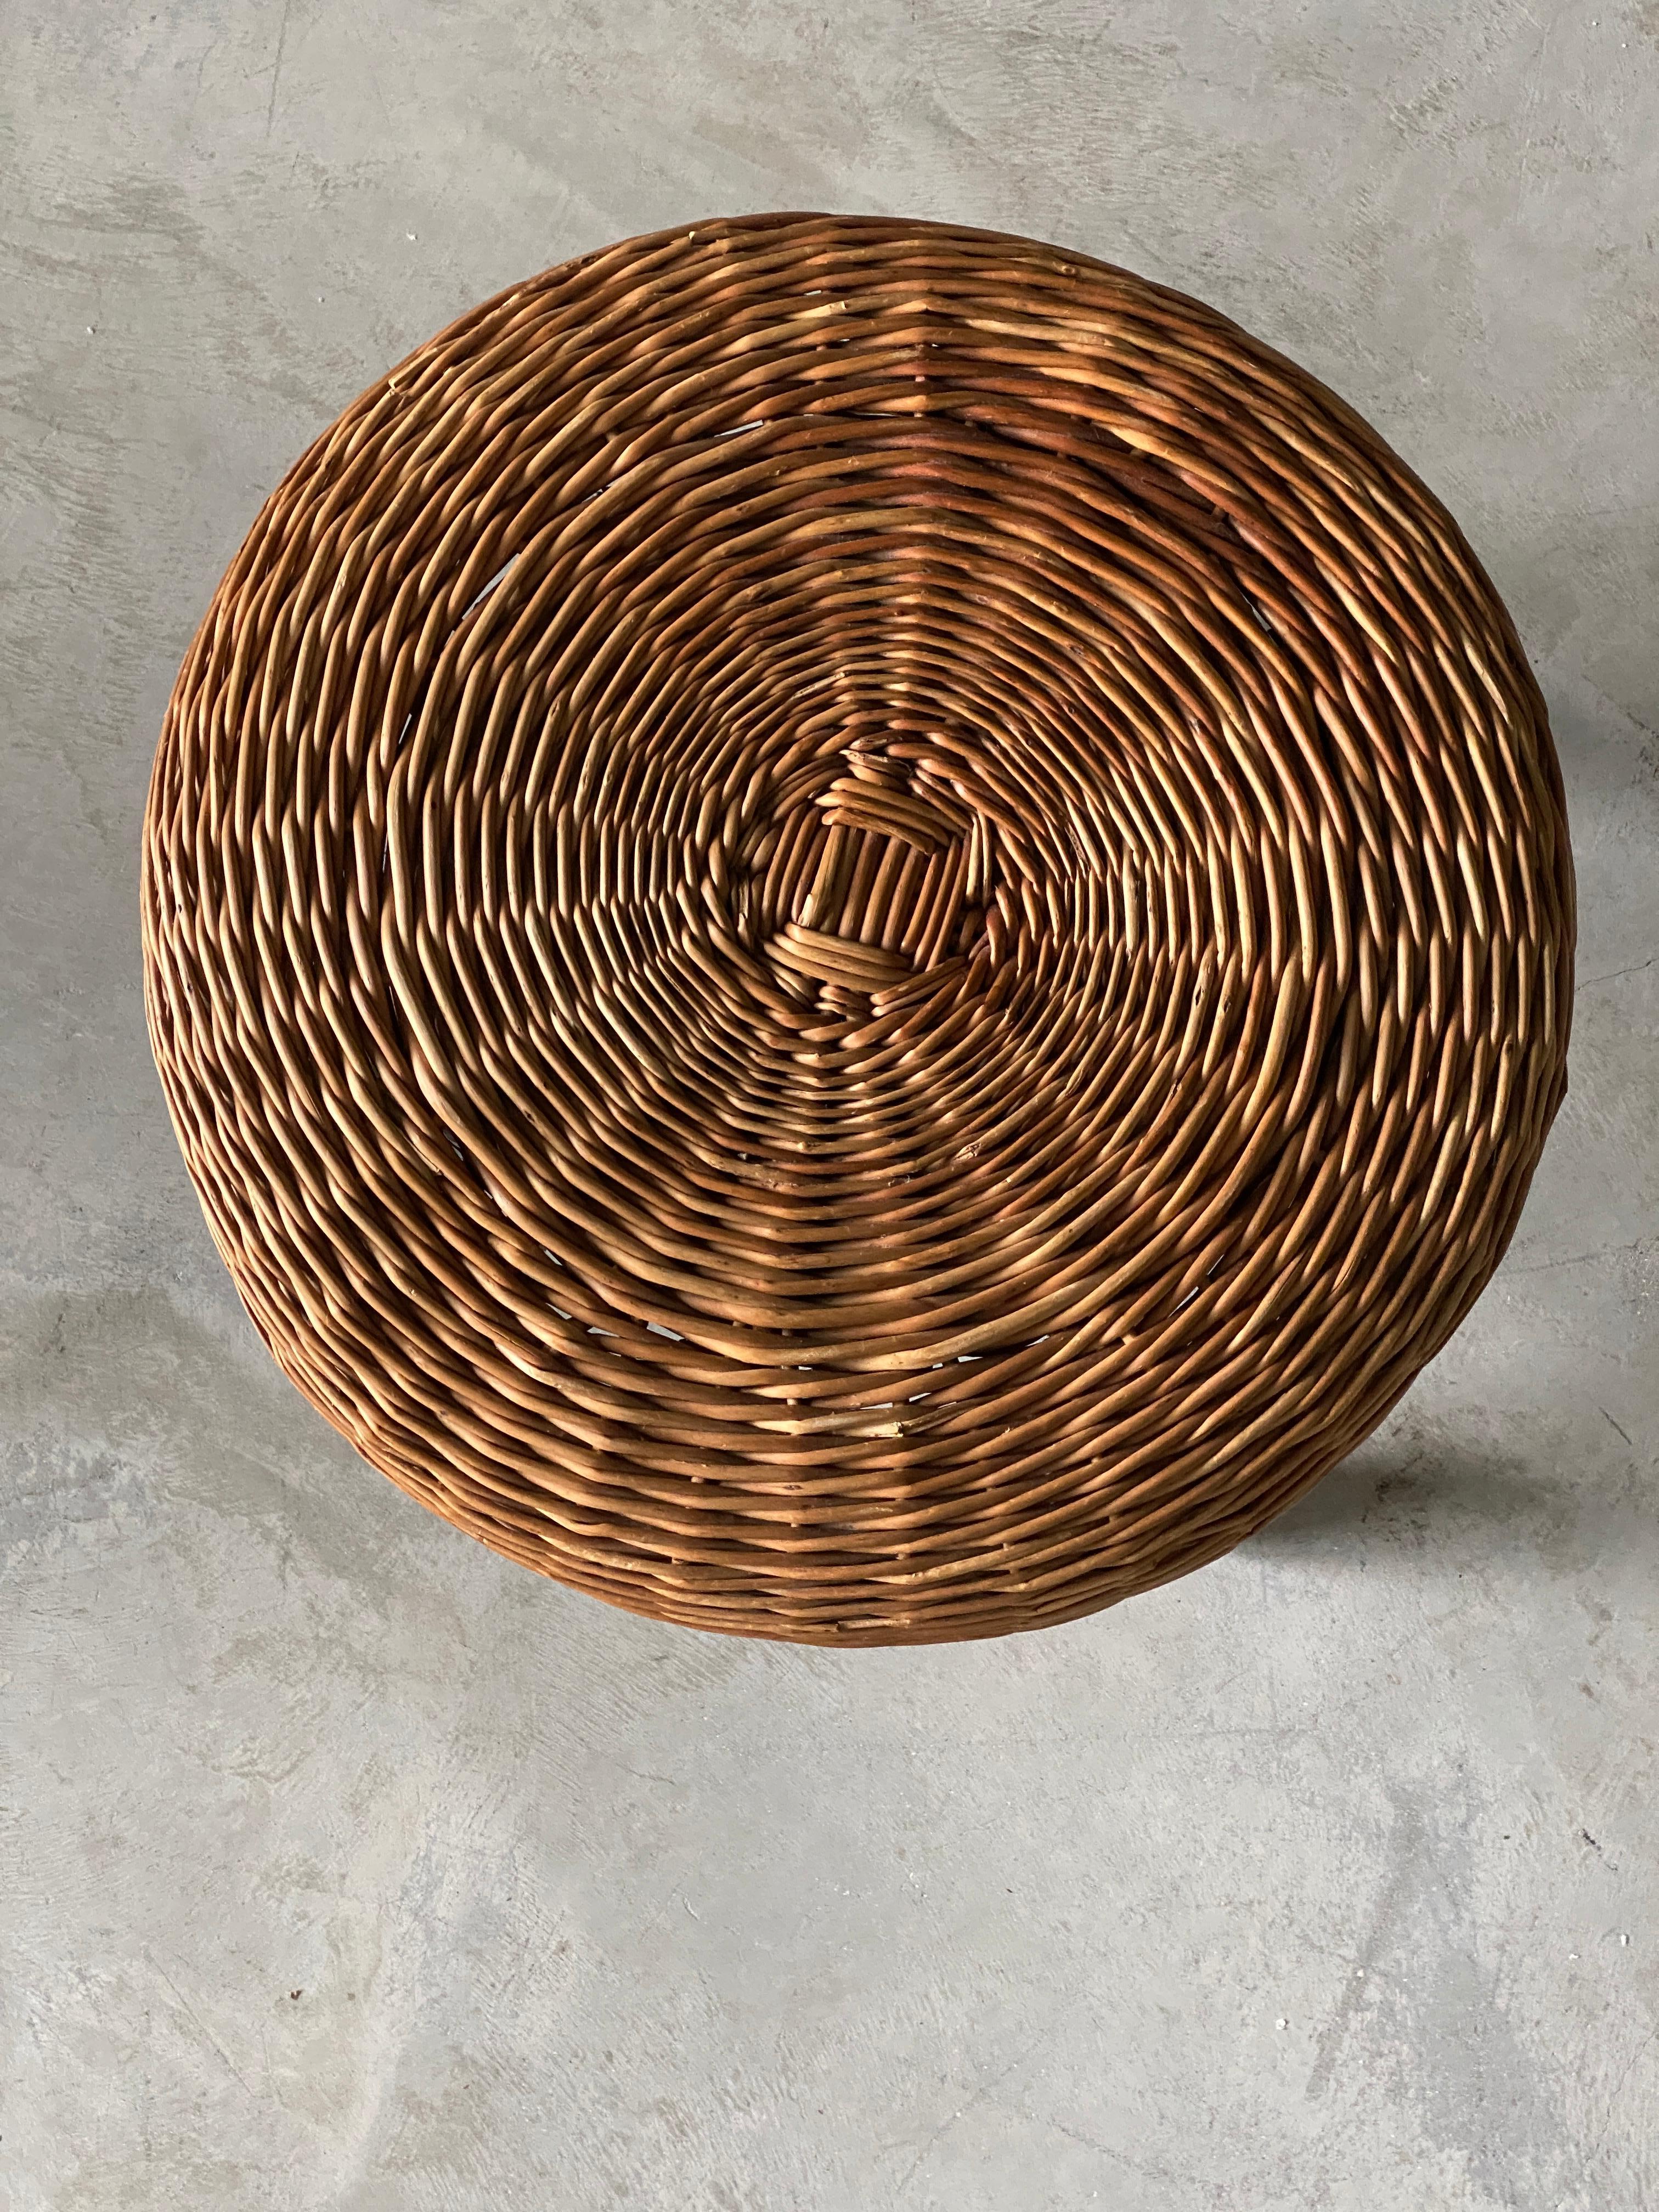 Mid-Century Modern Tony Paul 'Attribution' Large Stool, Woven Rattan (For client R.) 